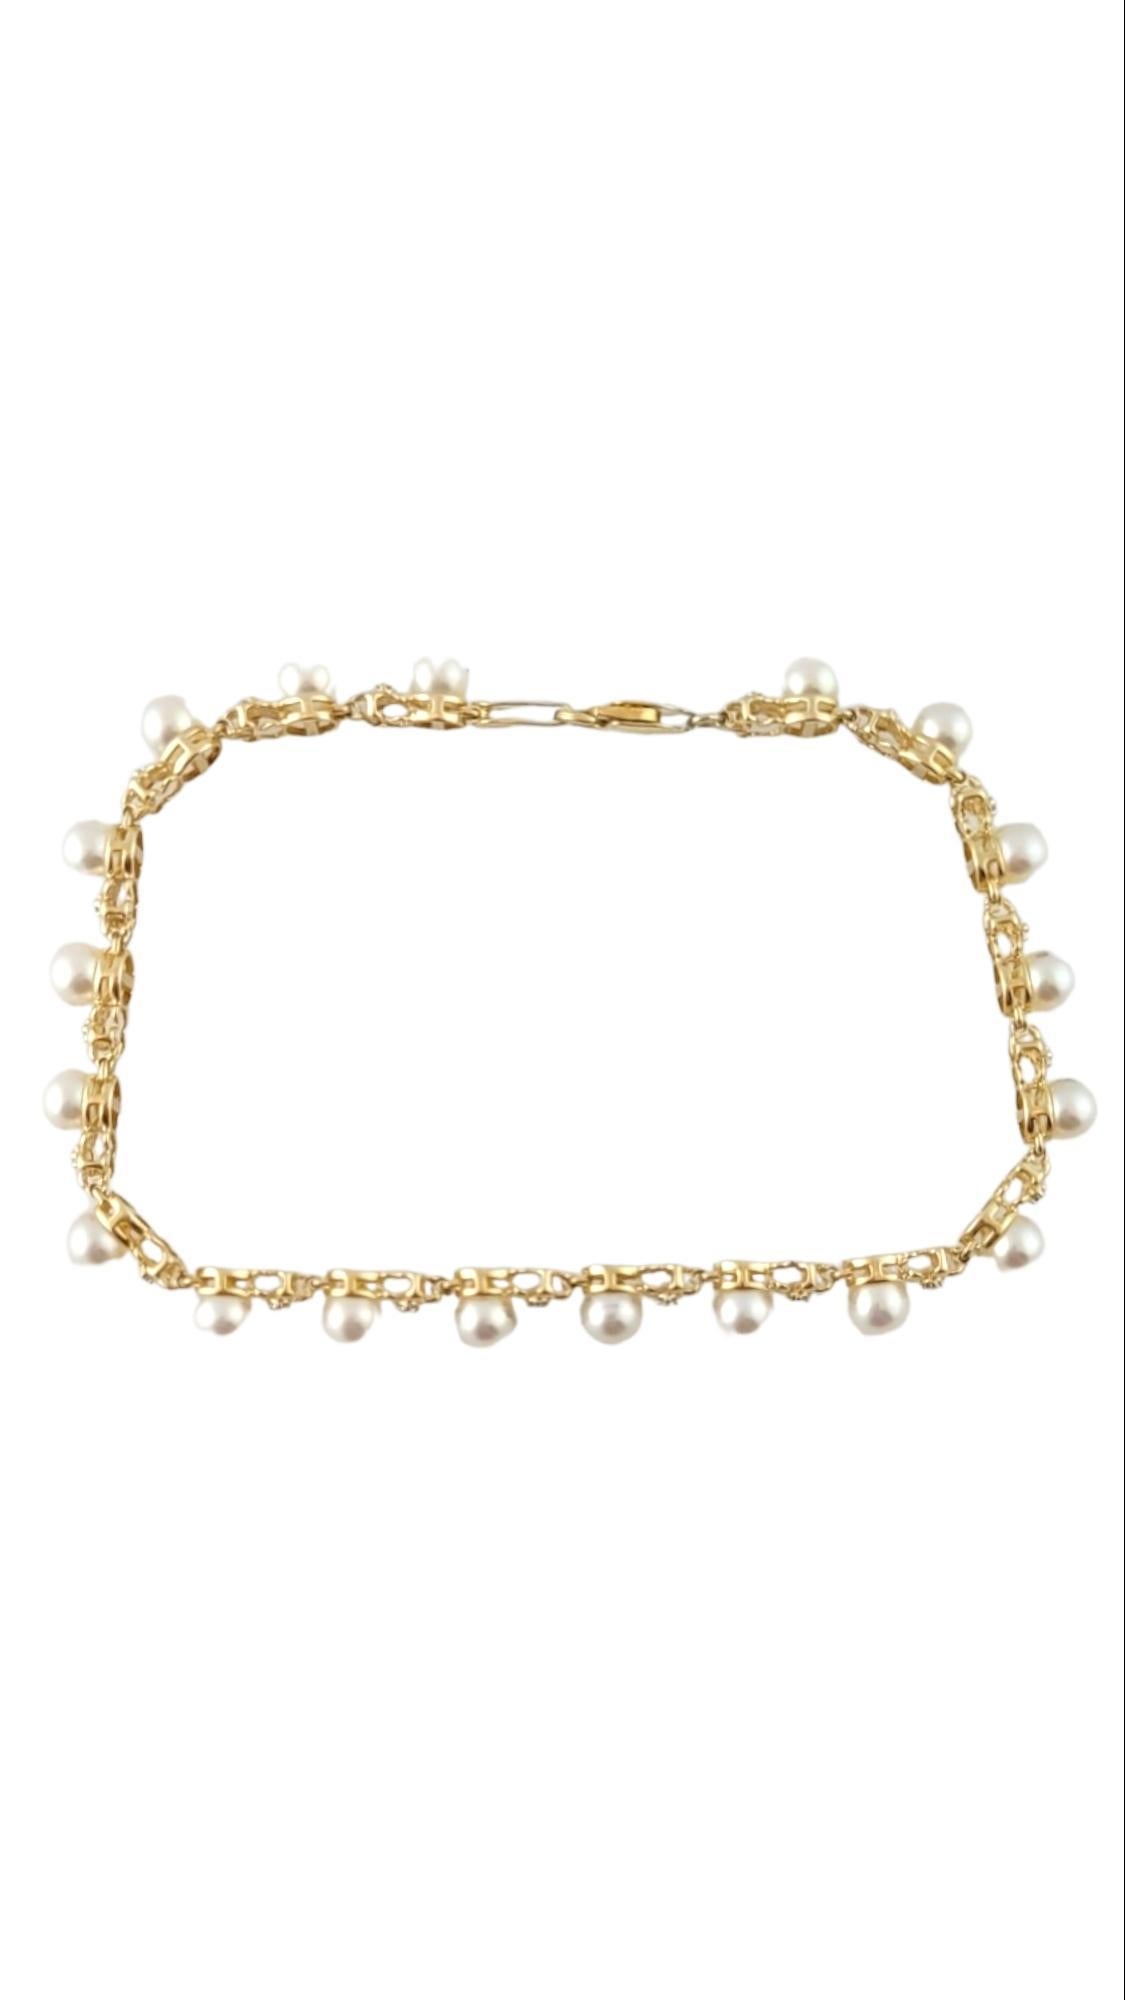 Round Cut 14K Yellow Gold Pearl Tennis Bracelet #15200 For Sale